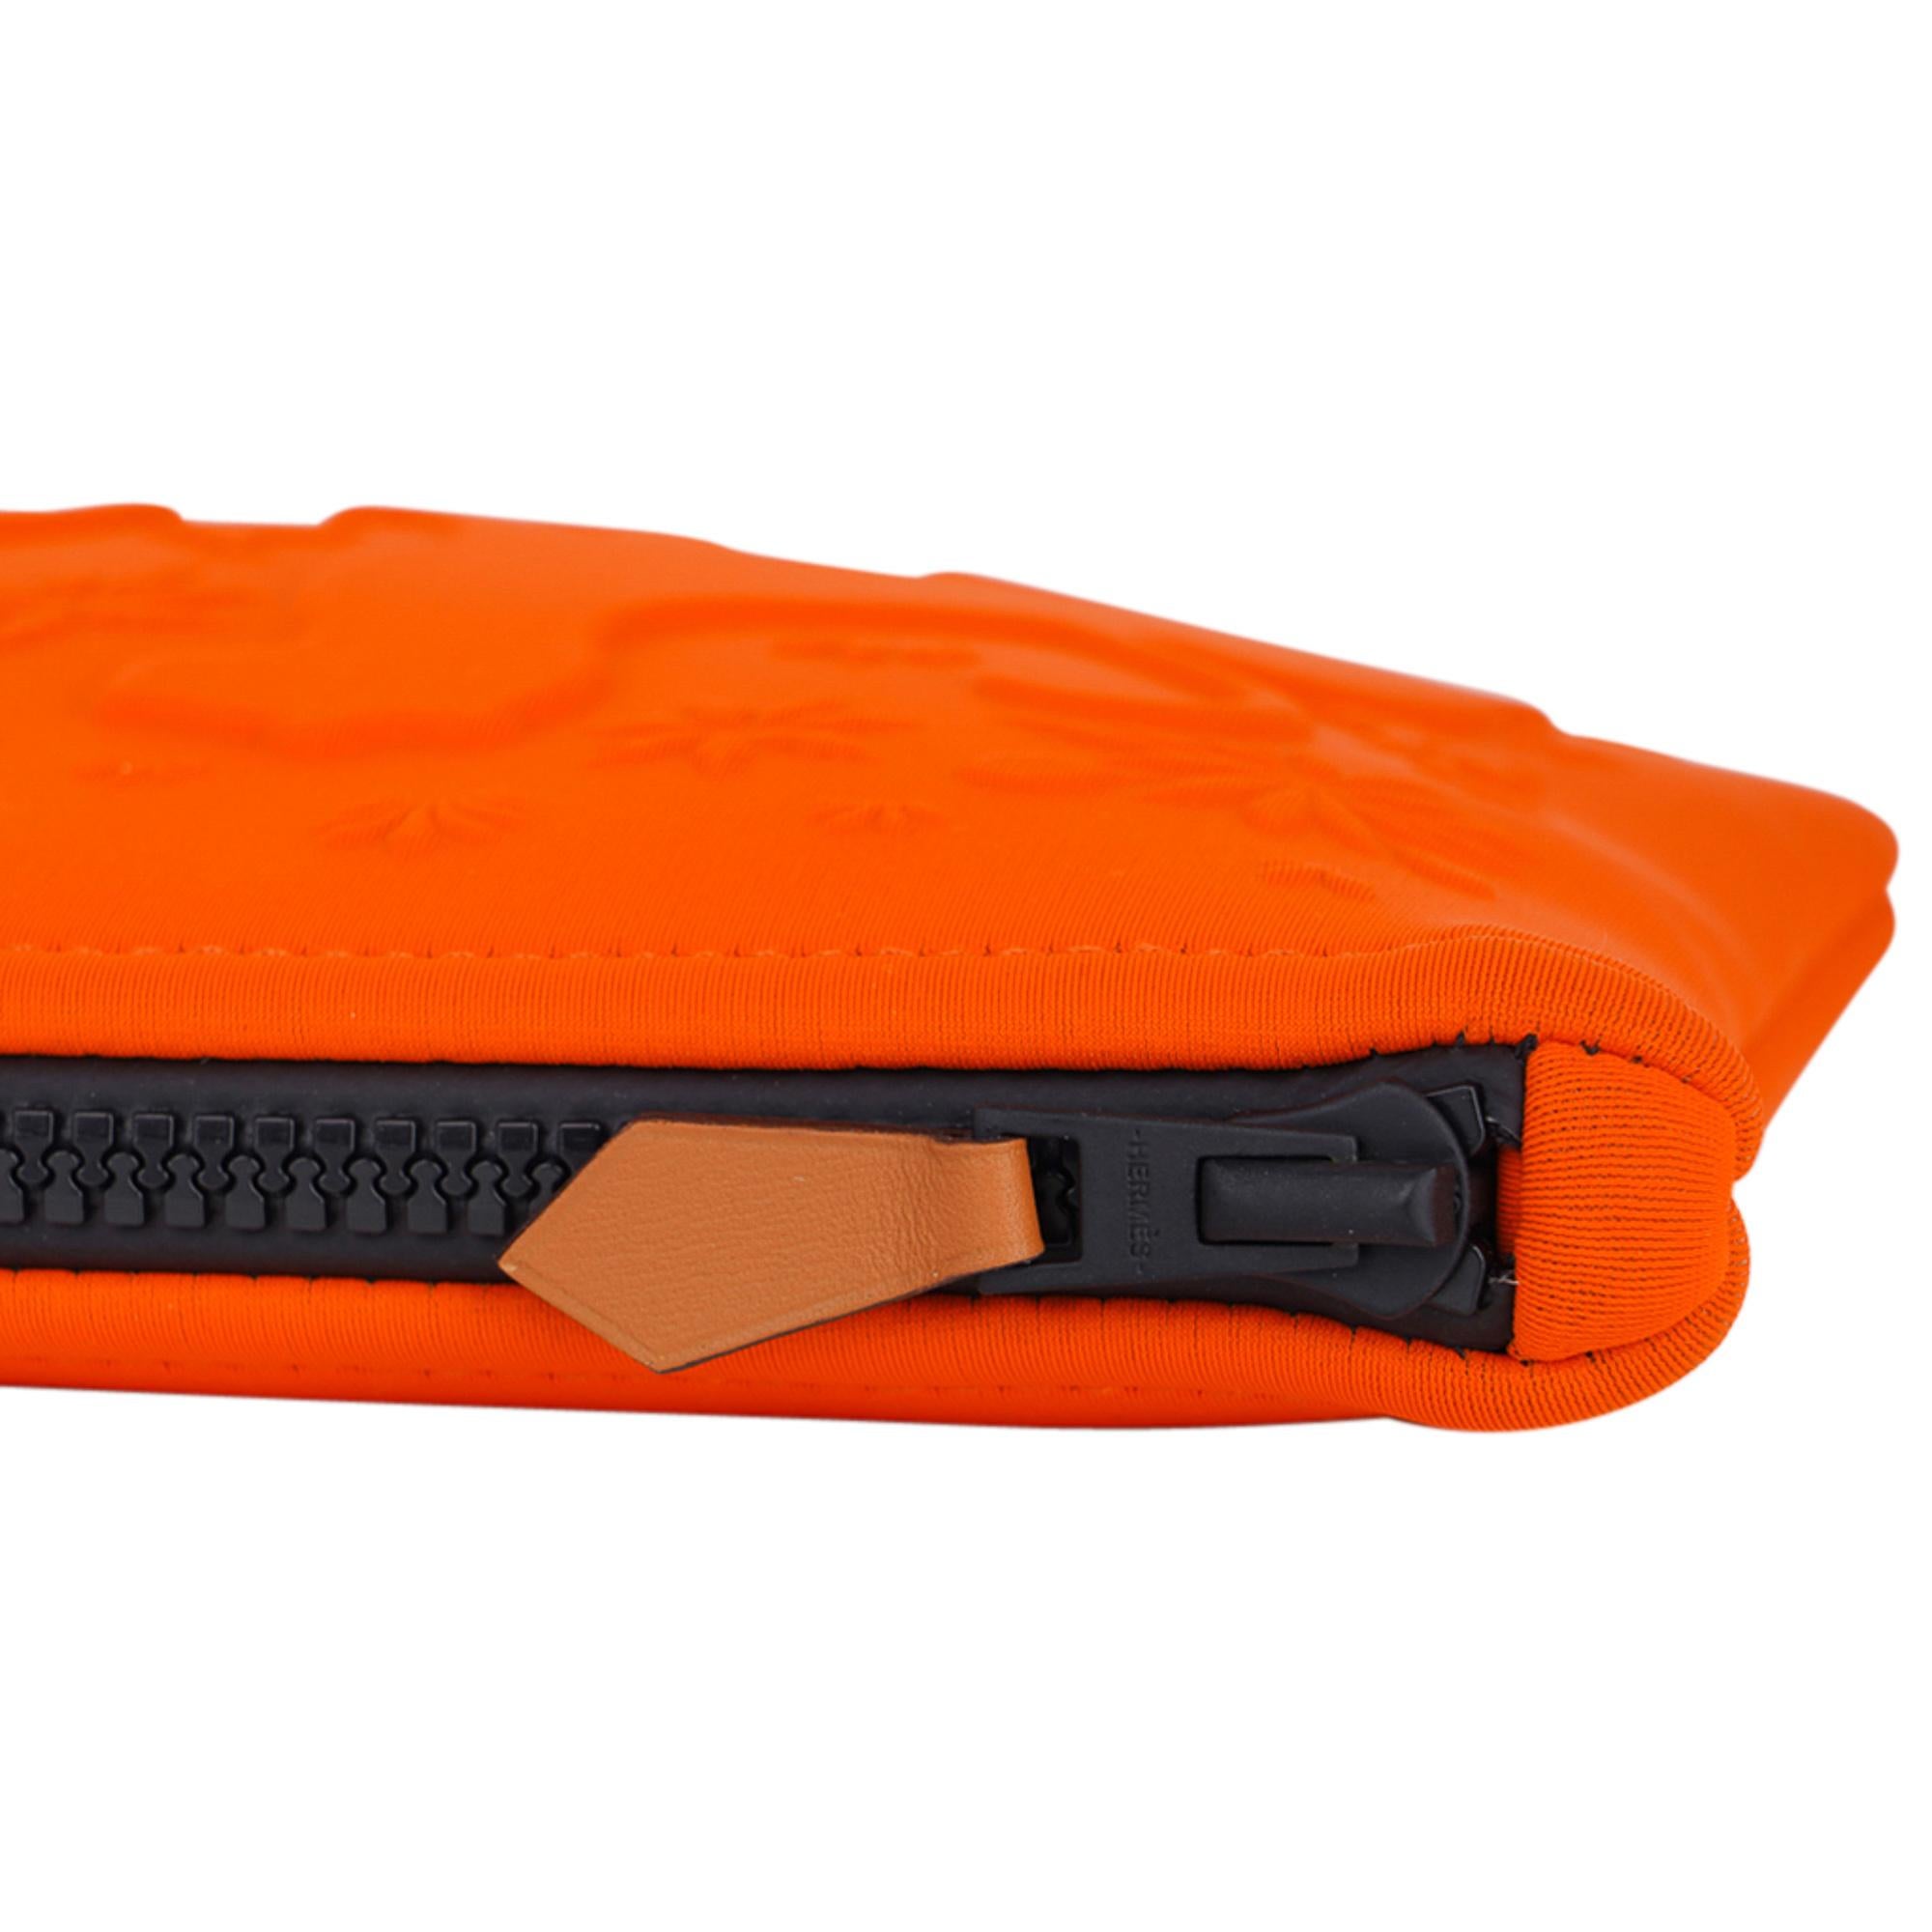 Guaranteed authentic limited edition Hermes Neobain Les Leopards case featured in the small model.
Beautiful signature Orange with two leopards embossed on front.
Top black zipper with Barenia leather zipper toggle.
Water repellent Polyamide and